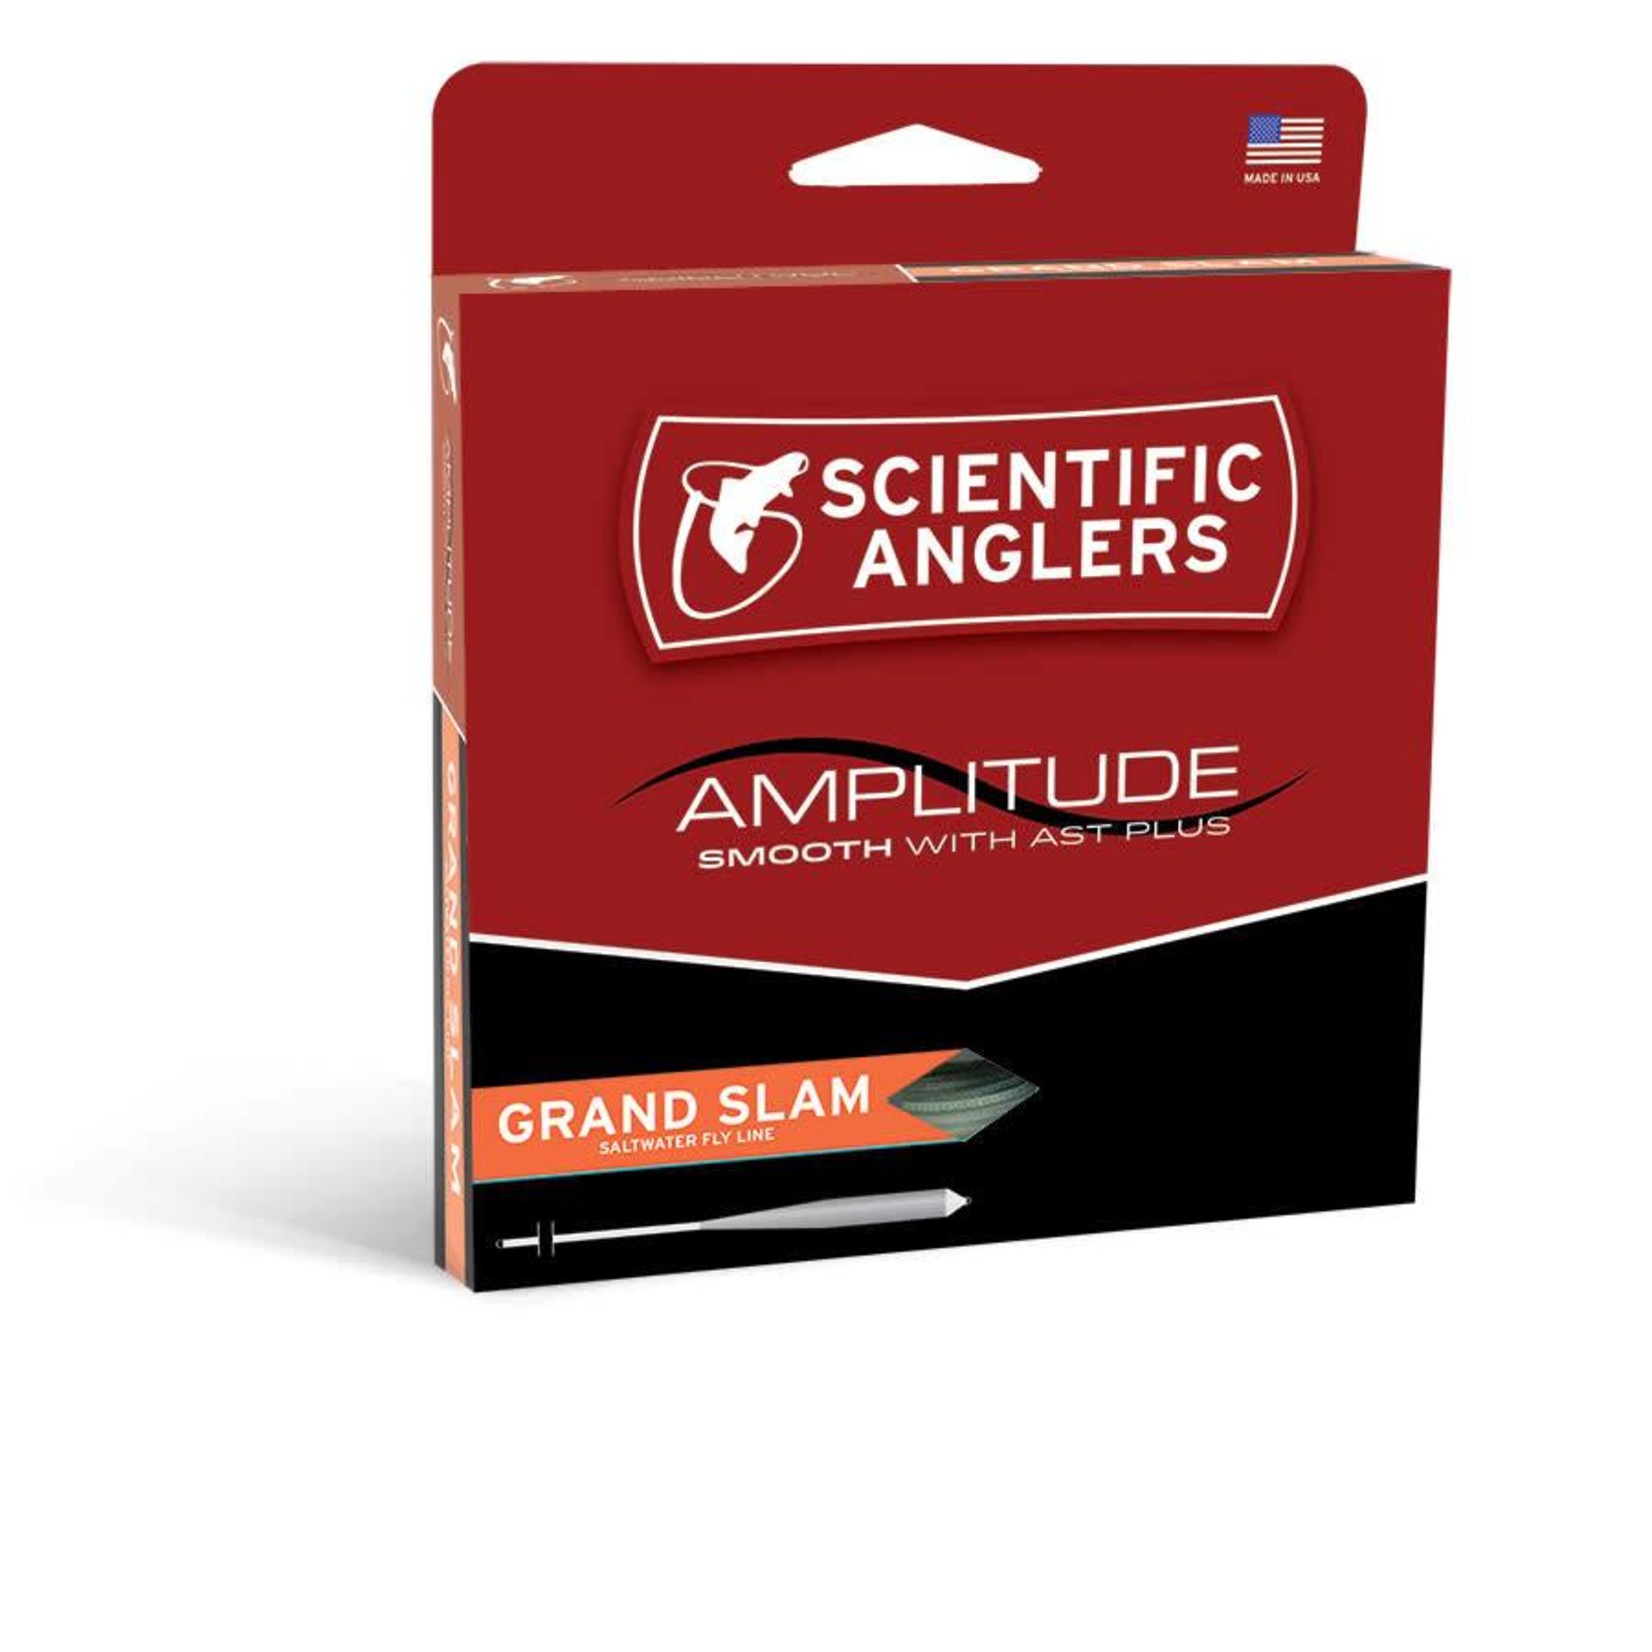 Scientific Anglers Amplitude Smooth Grand Slam Fly Line -